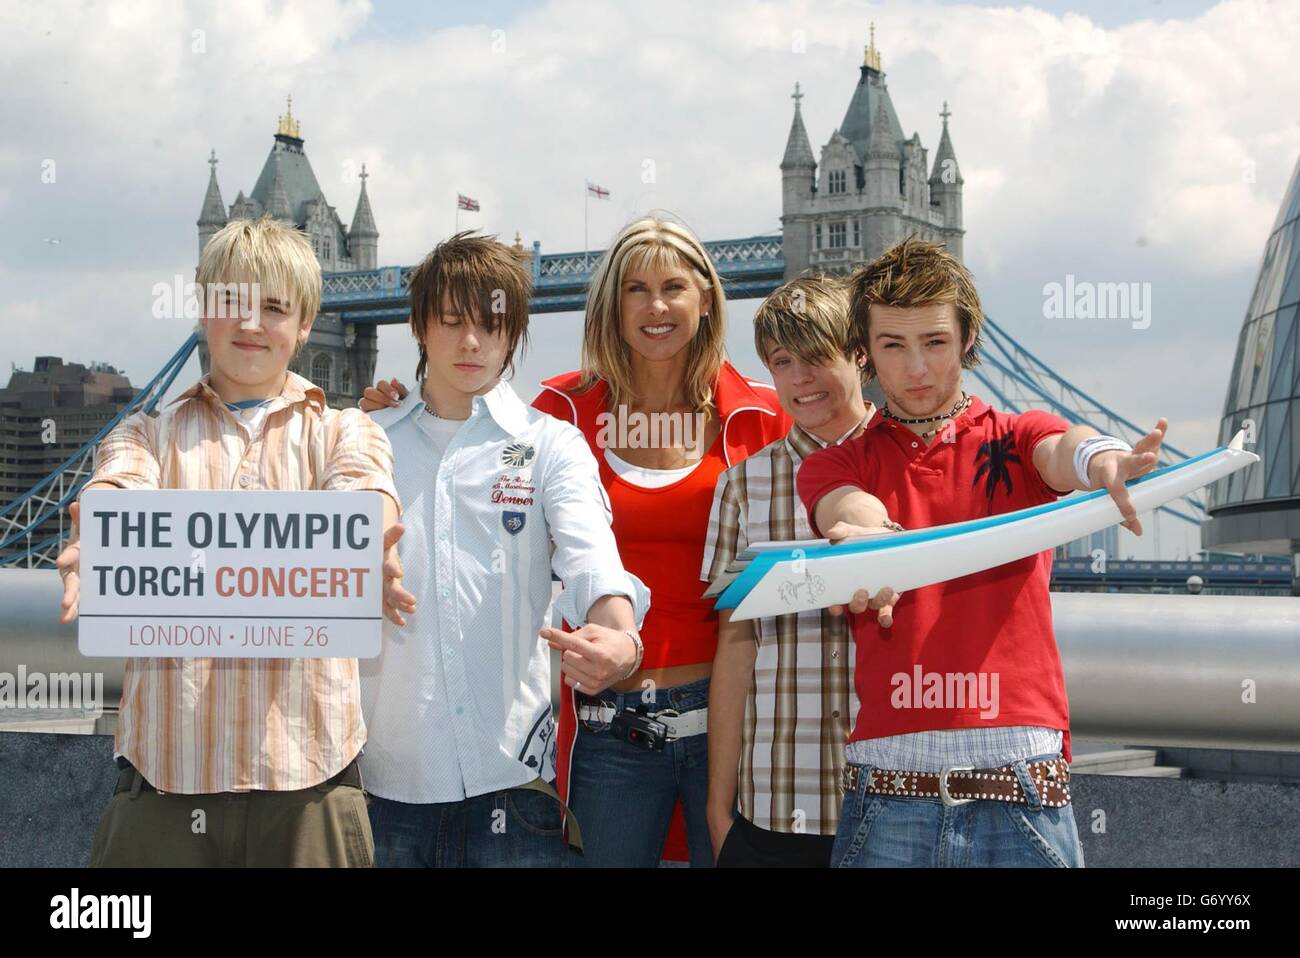 Former Olympic swimmer Sharron Davies and Pop band McFly pose for photographers during a photocall to announce the Olympic Torch Concert at Visit London on London's Southbank. The open-air concert, marking the finish of the 2004 Olympic Torch relay run through London will take place on Saturday 26 June 2004. Stock Photo